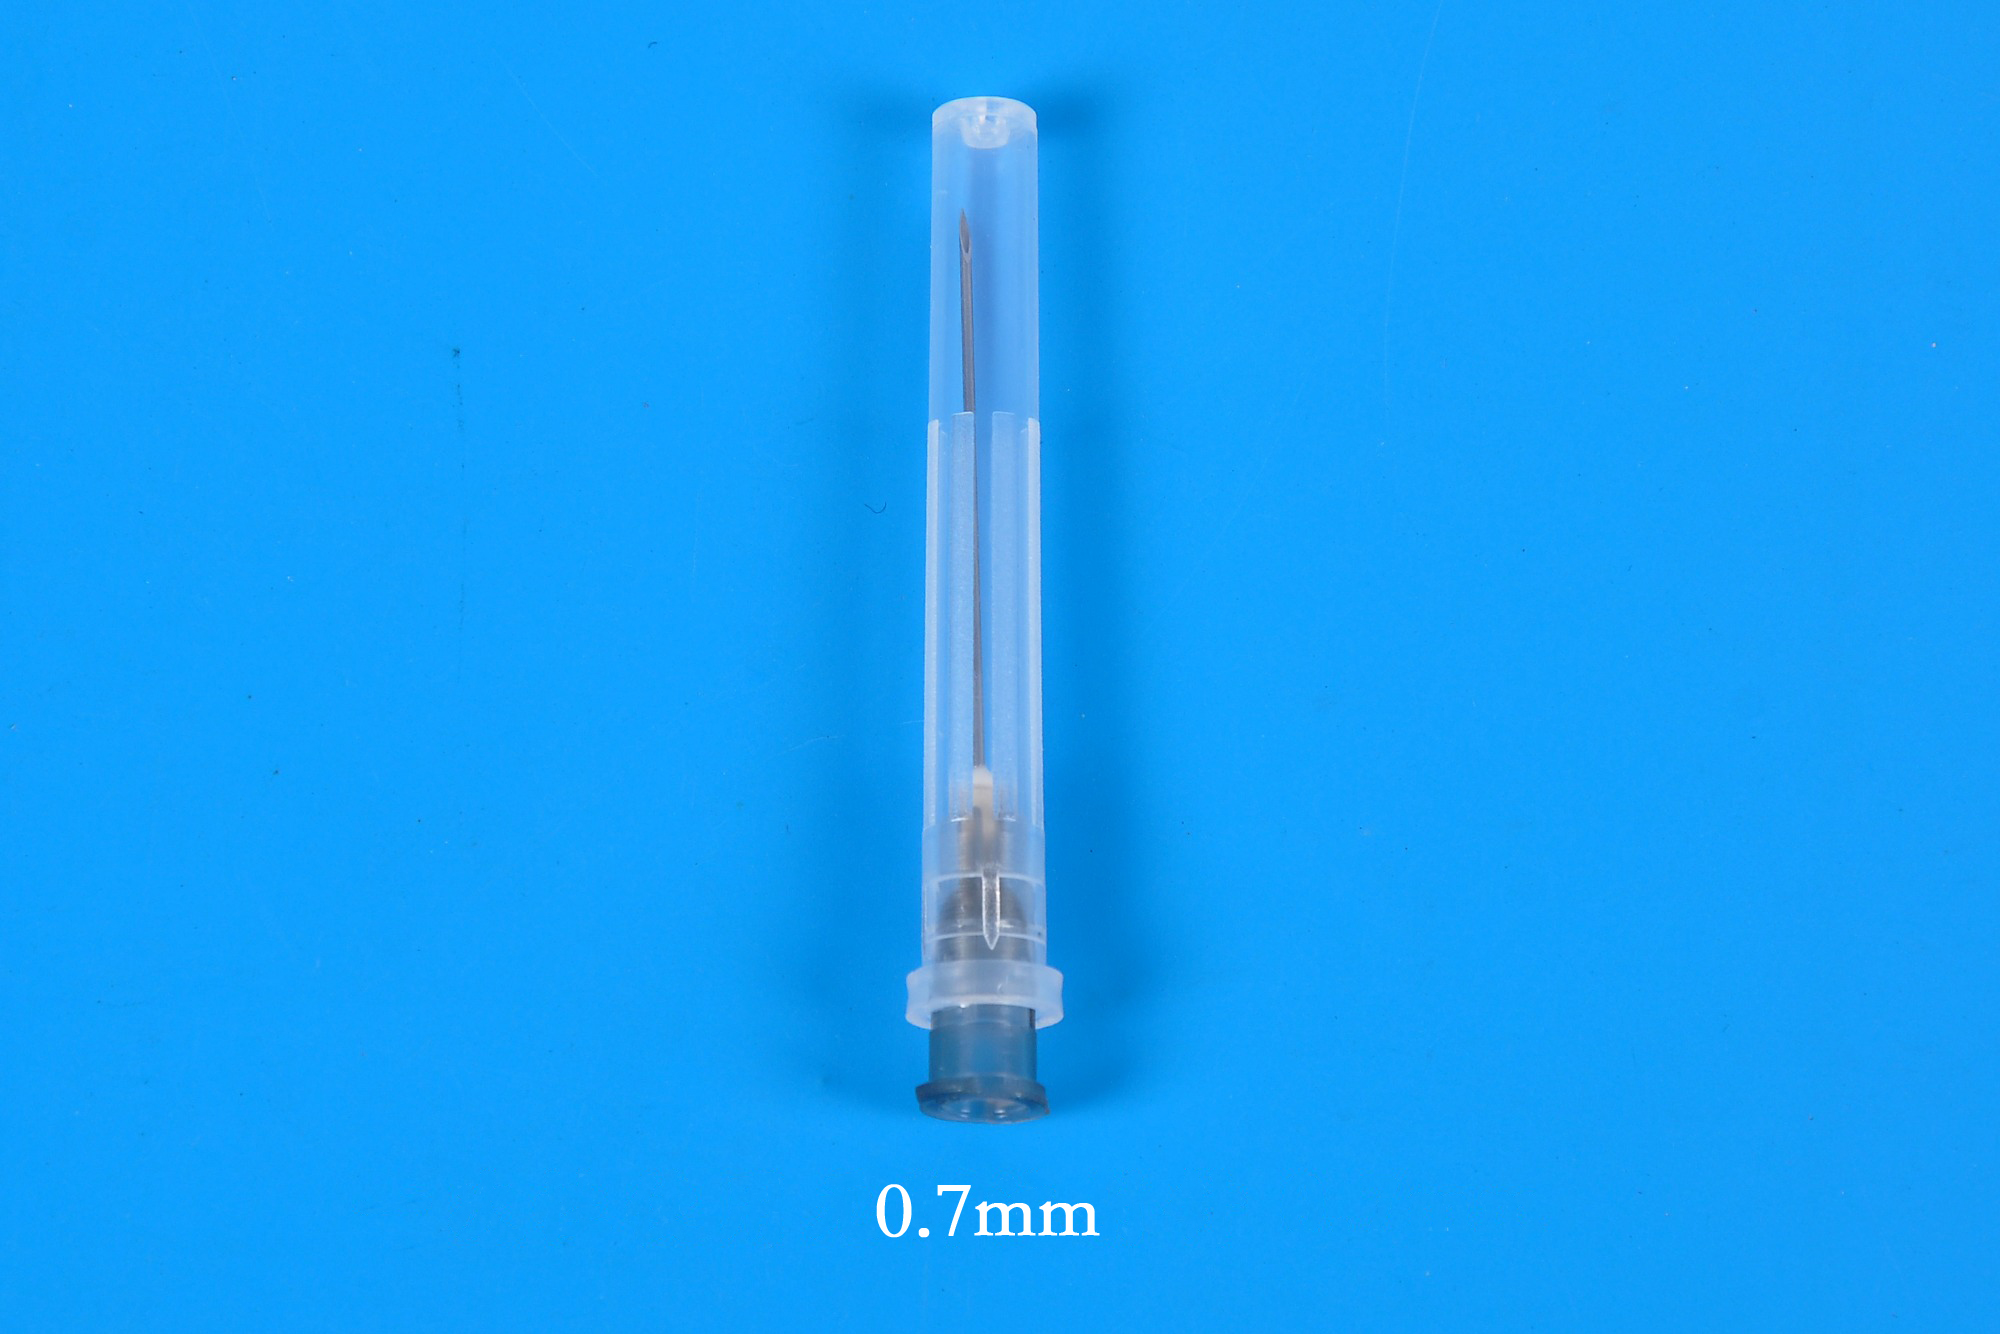 Sterile hypodermic needles for single use